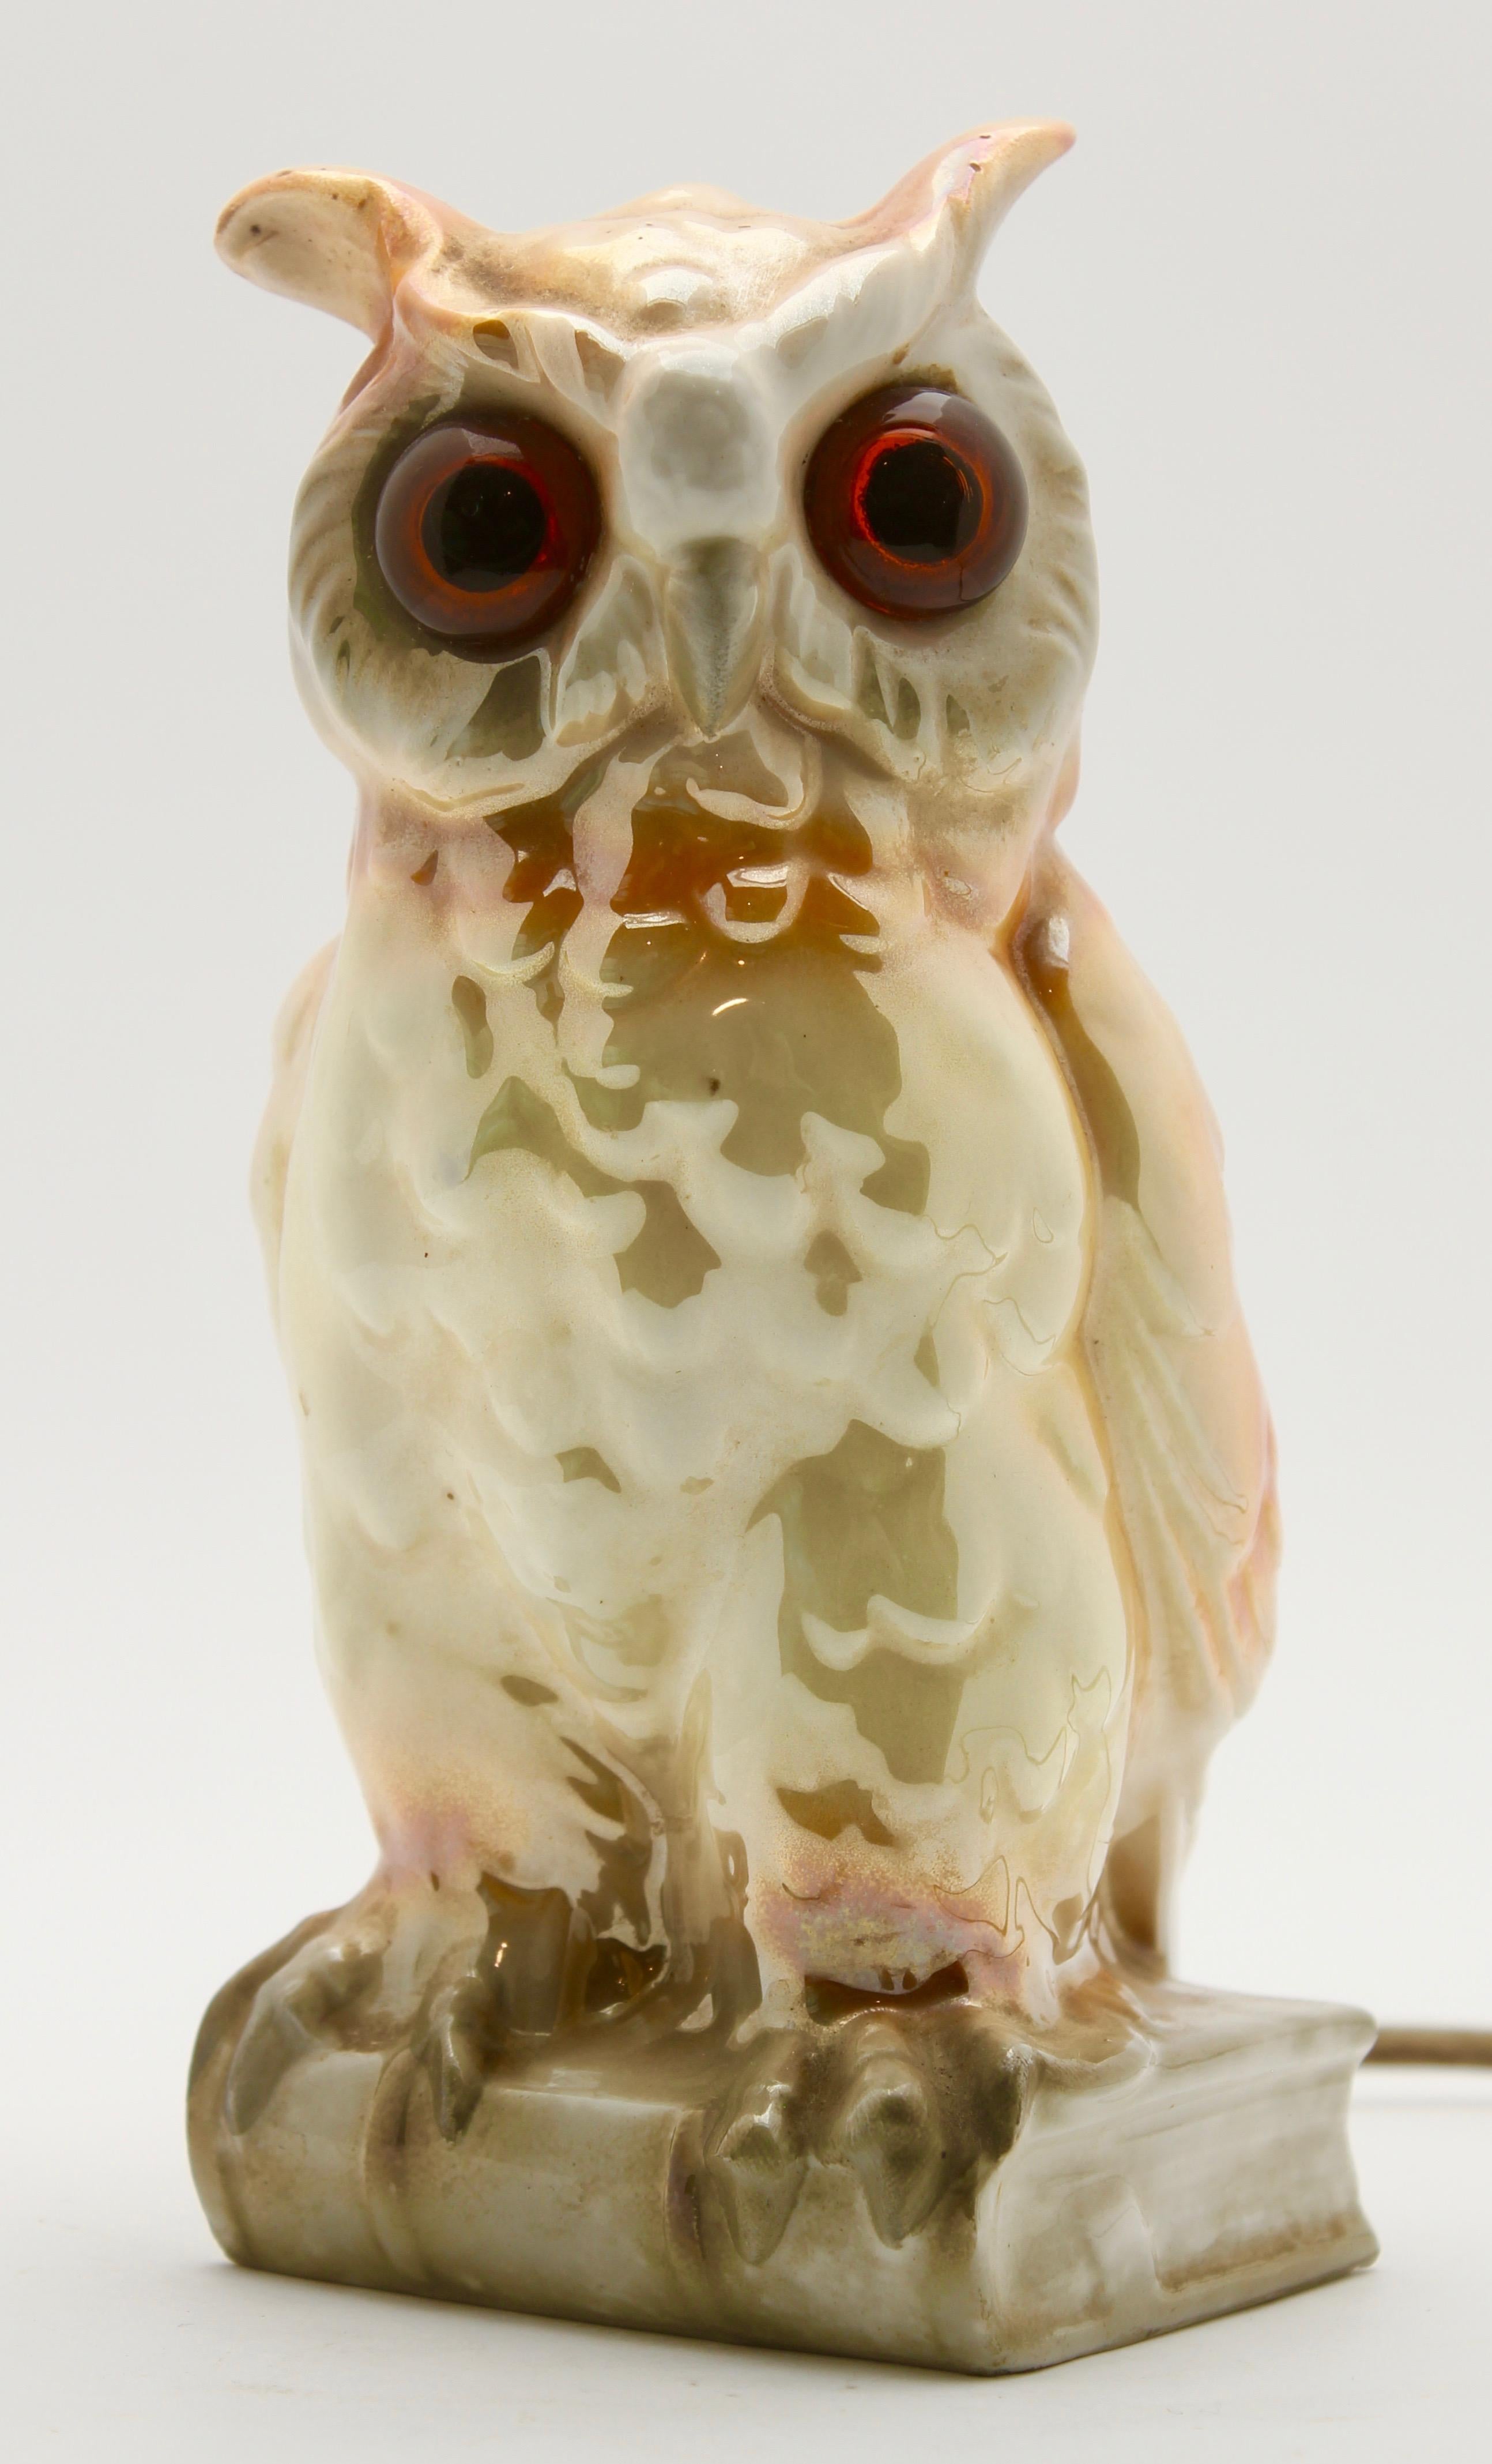 Germany, 1930s, excellent condition
Porcelain figurine / air purifier / table lamp. Owl. Undamaged original condition. The lighting works. A small container on the back can be filled with fragrance oil. The oil evaporates due to the heat of the